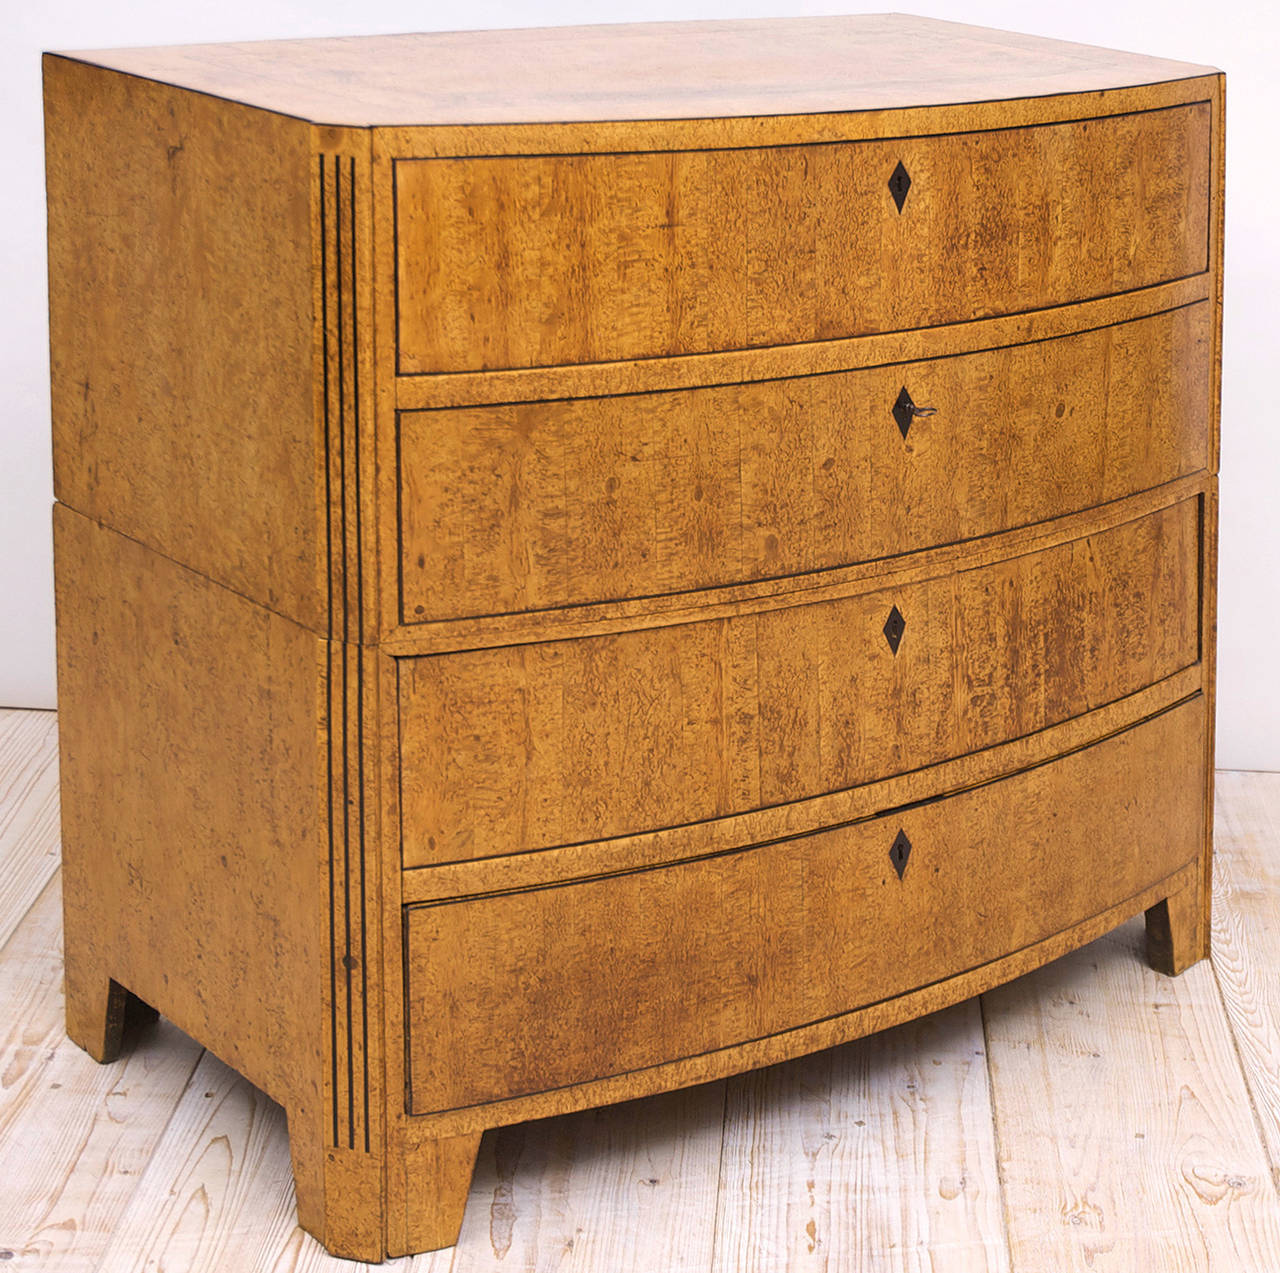 Scandinavian Empire Bow-Front Chest of Drawers in Burled Olivewood